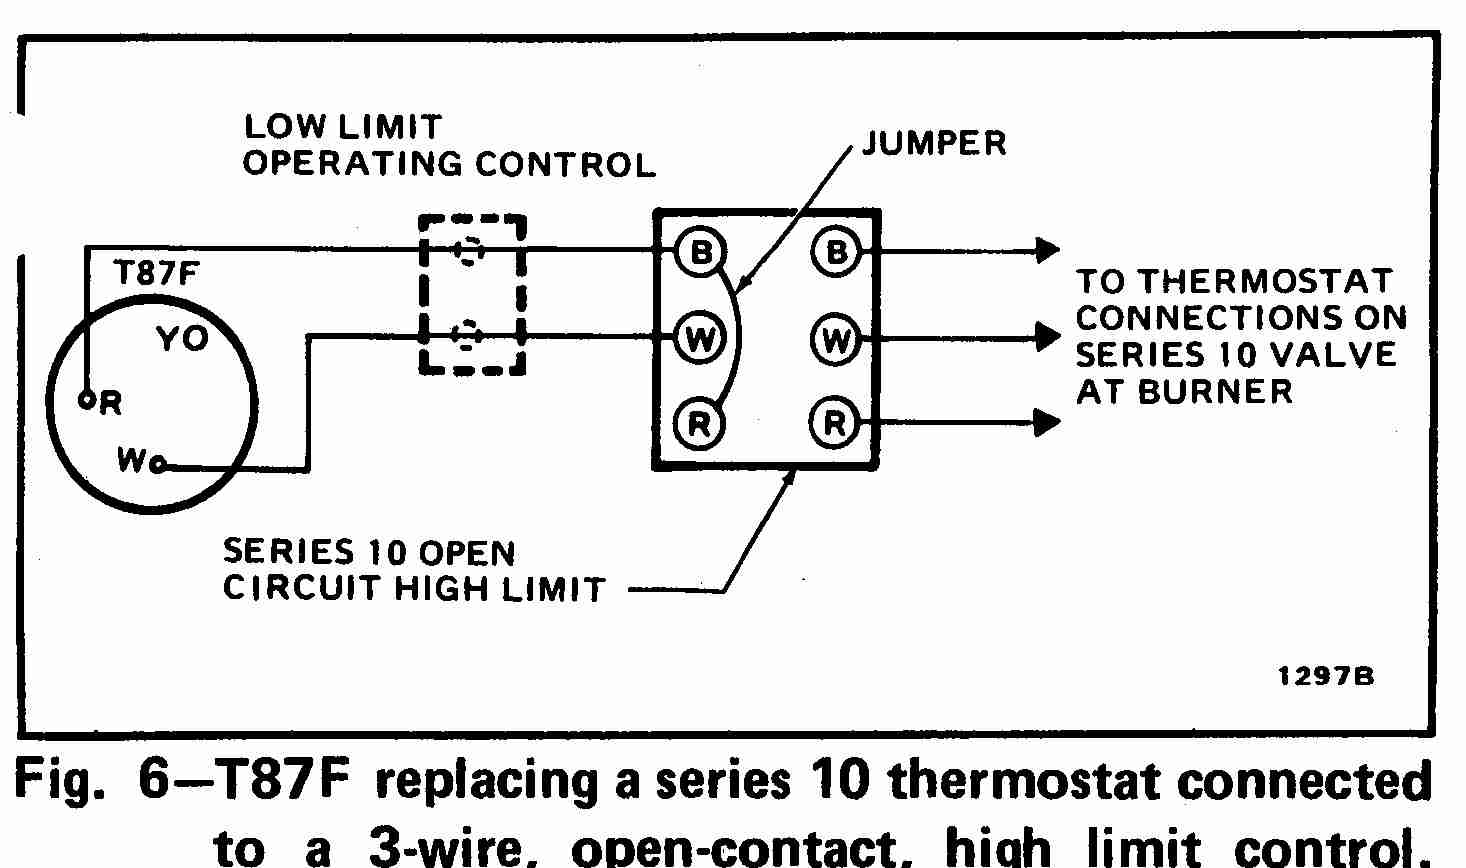 Room Thermostat Wiring Diagrams For Hvac Systems - Wiring Diagram For Thermostats